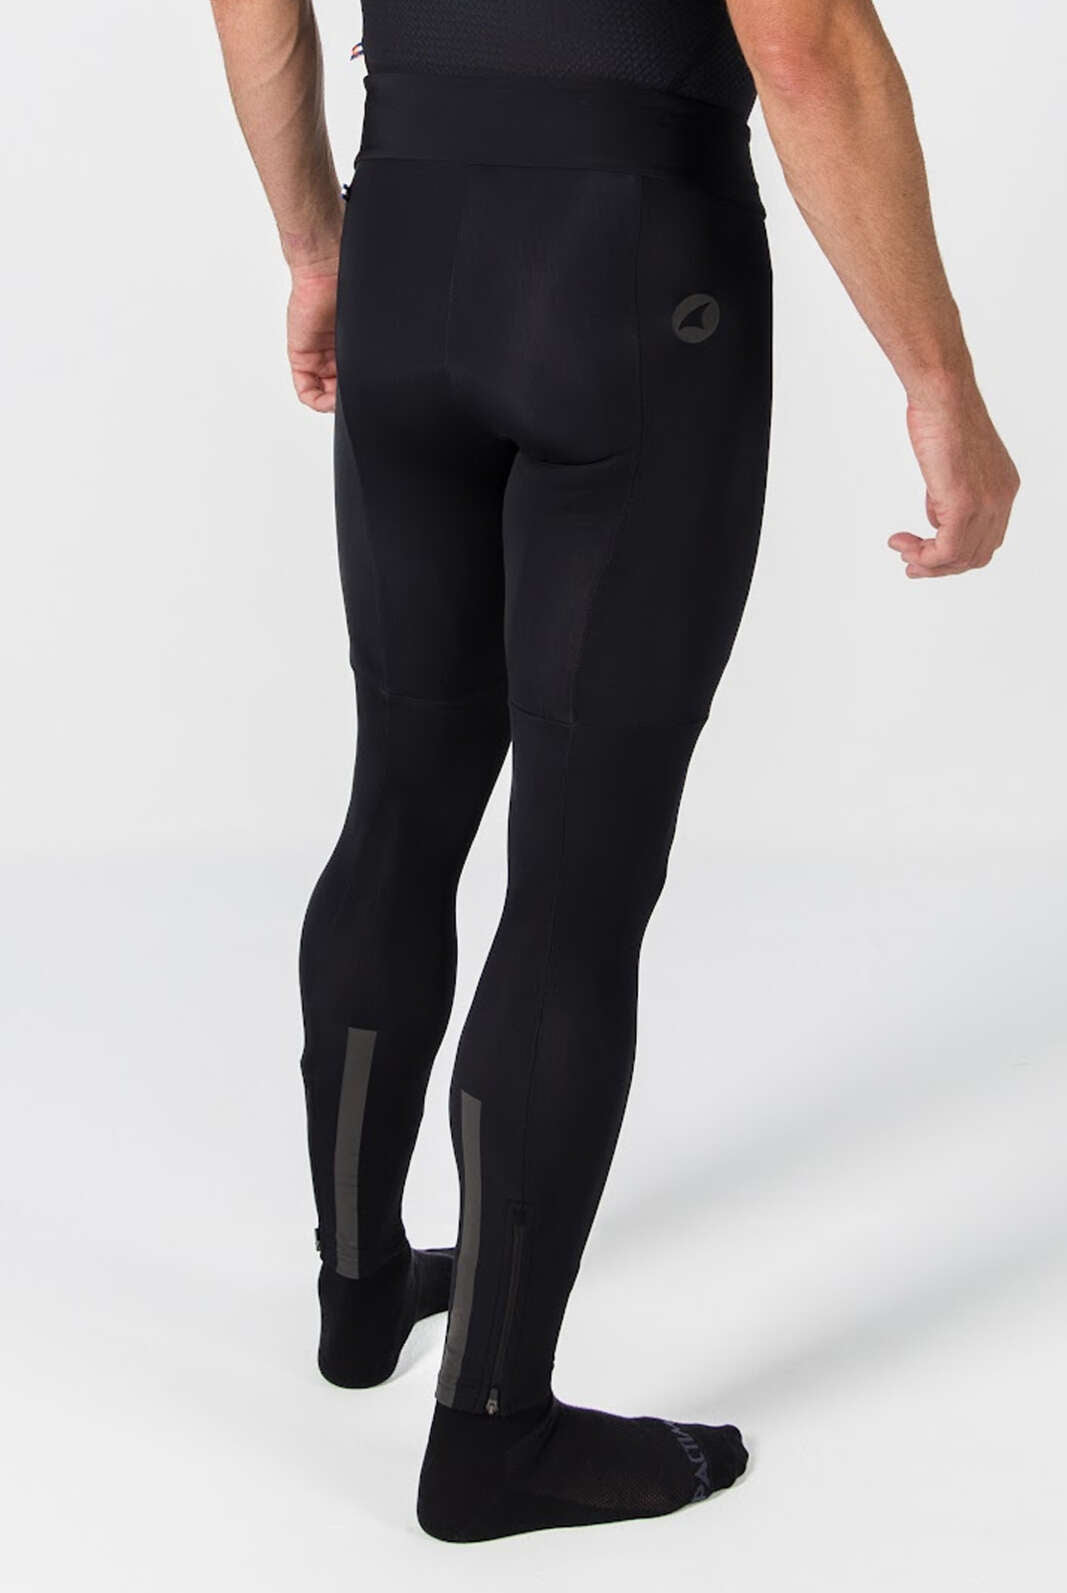 Men's Thermal Cycling Tights - Back View